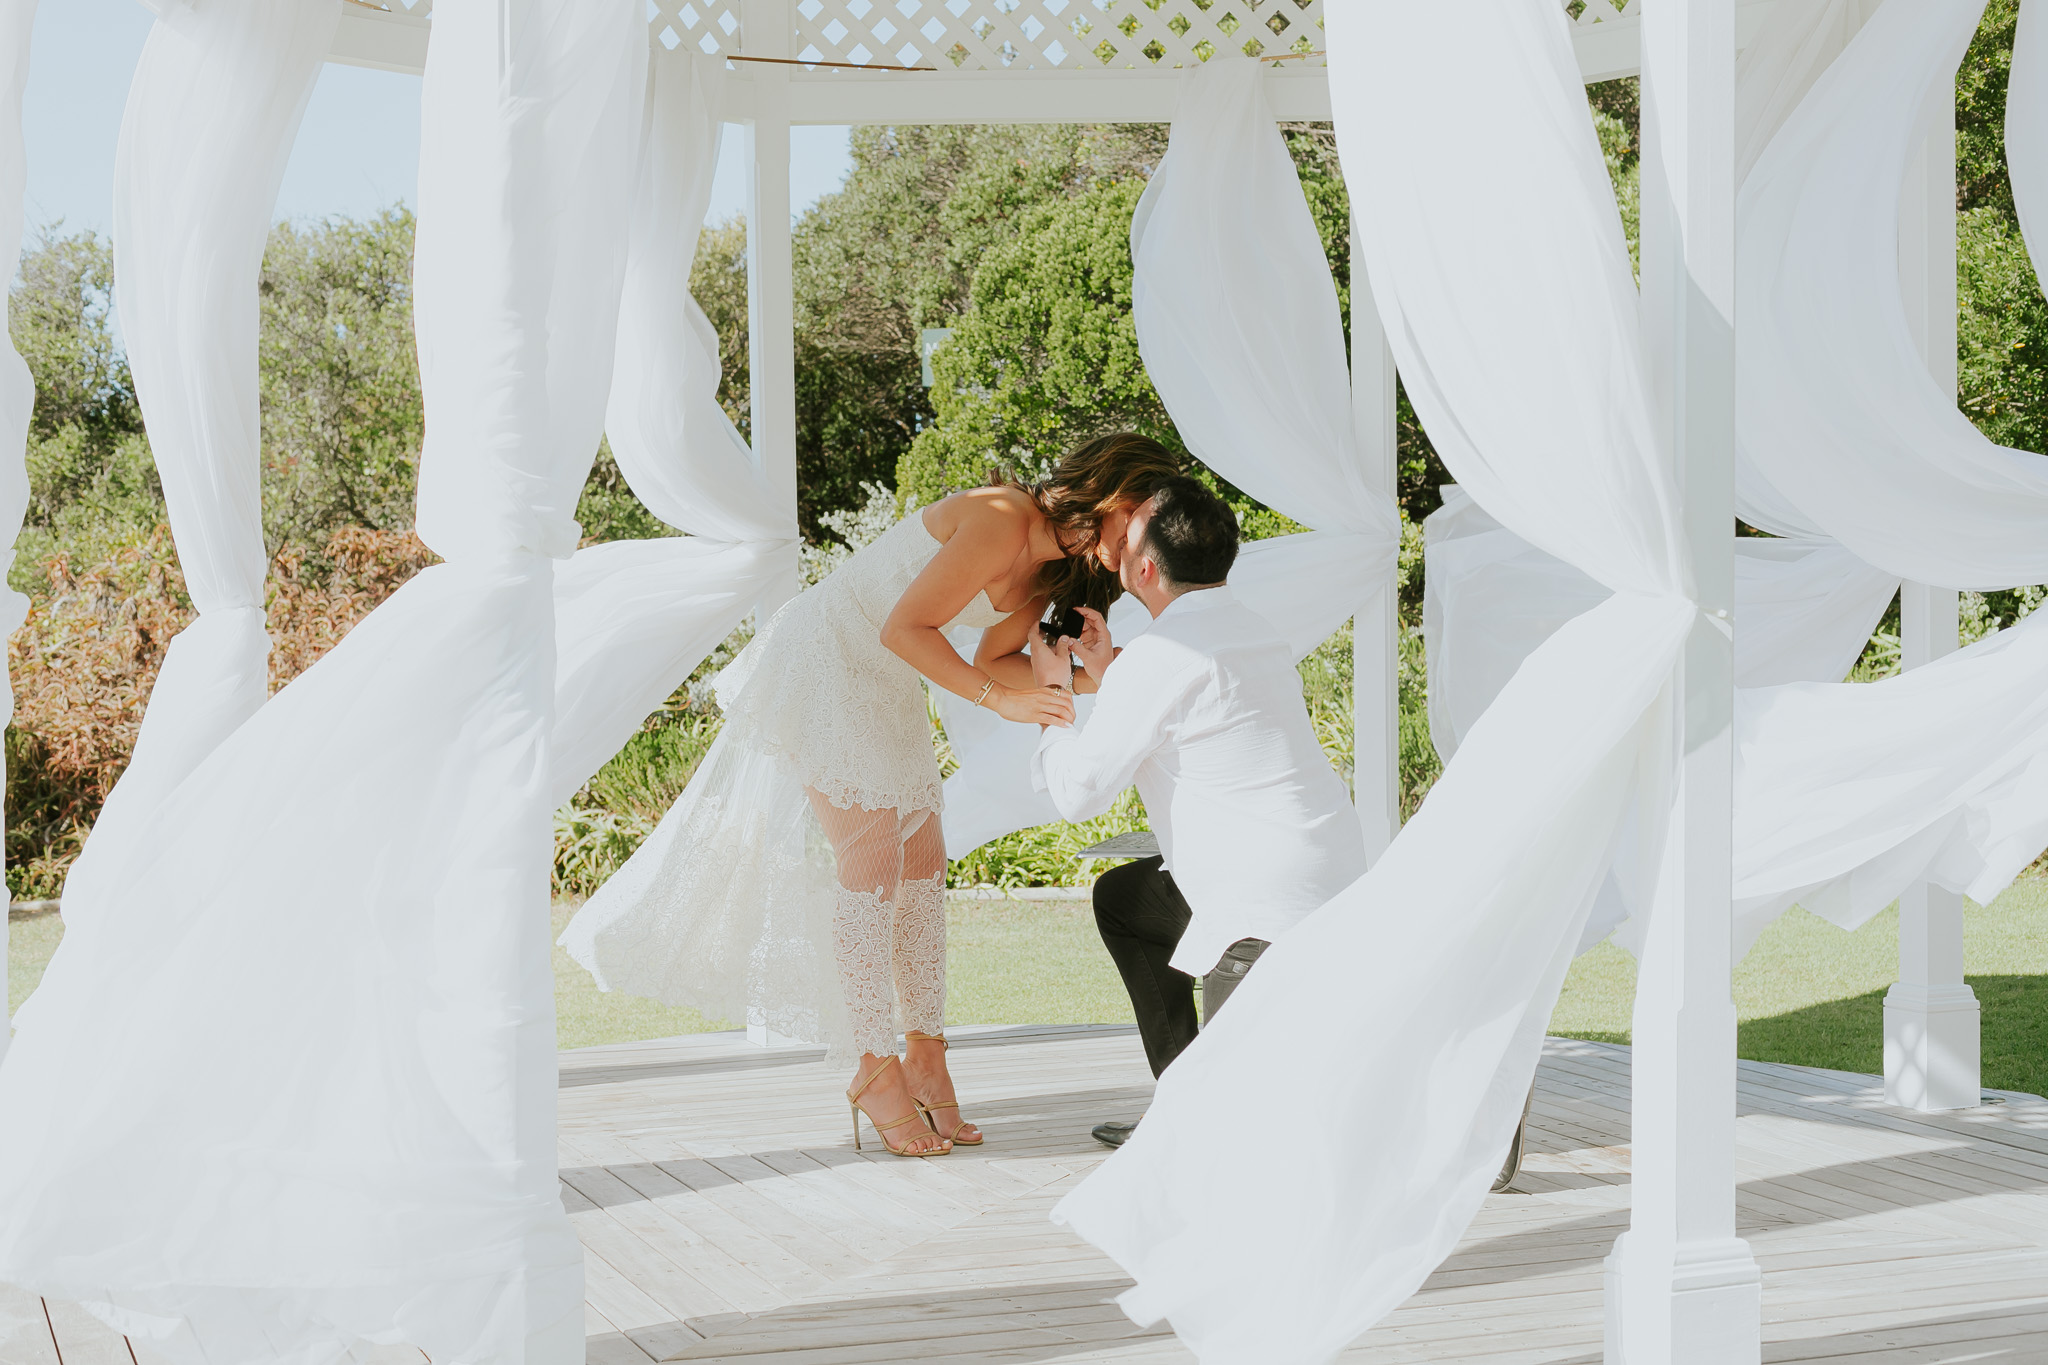 Engagement photographer 12apostles hotel and spa in Camps Bay